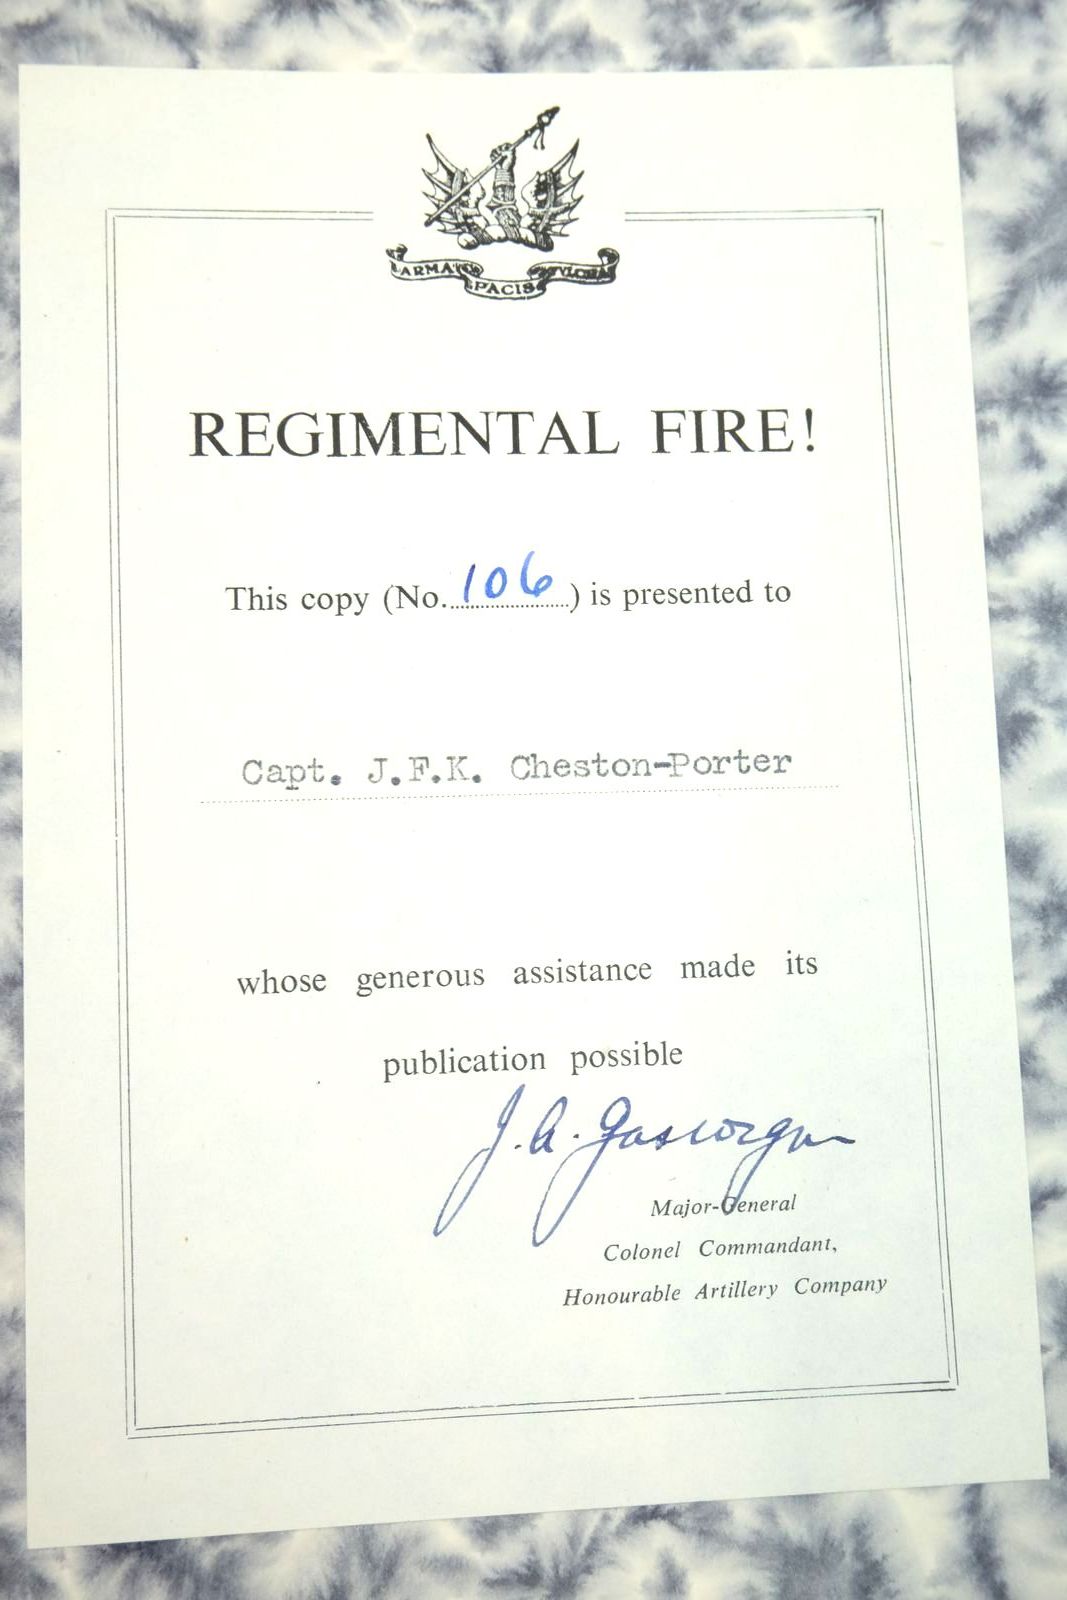 Photo of REGIMENTAL FIRE! THE HONOURABLE ARTILLERY COMPANY OF WORLD WAR II 1939-1945 written by Johnson, R.F. published by H.A.C. (STOCK CODE: 2137383)  for sale by Stella & Rose's Books